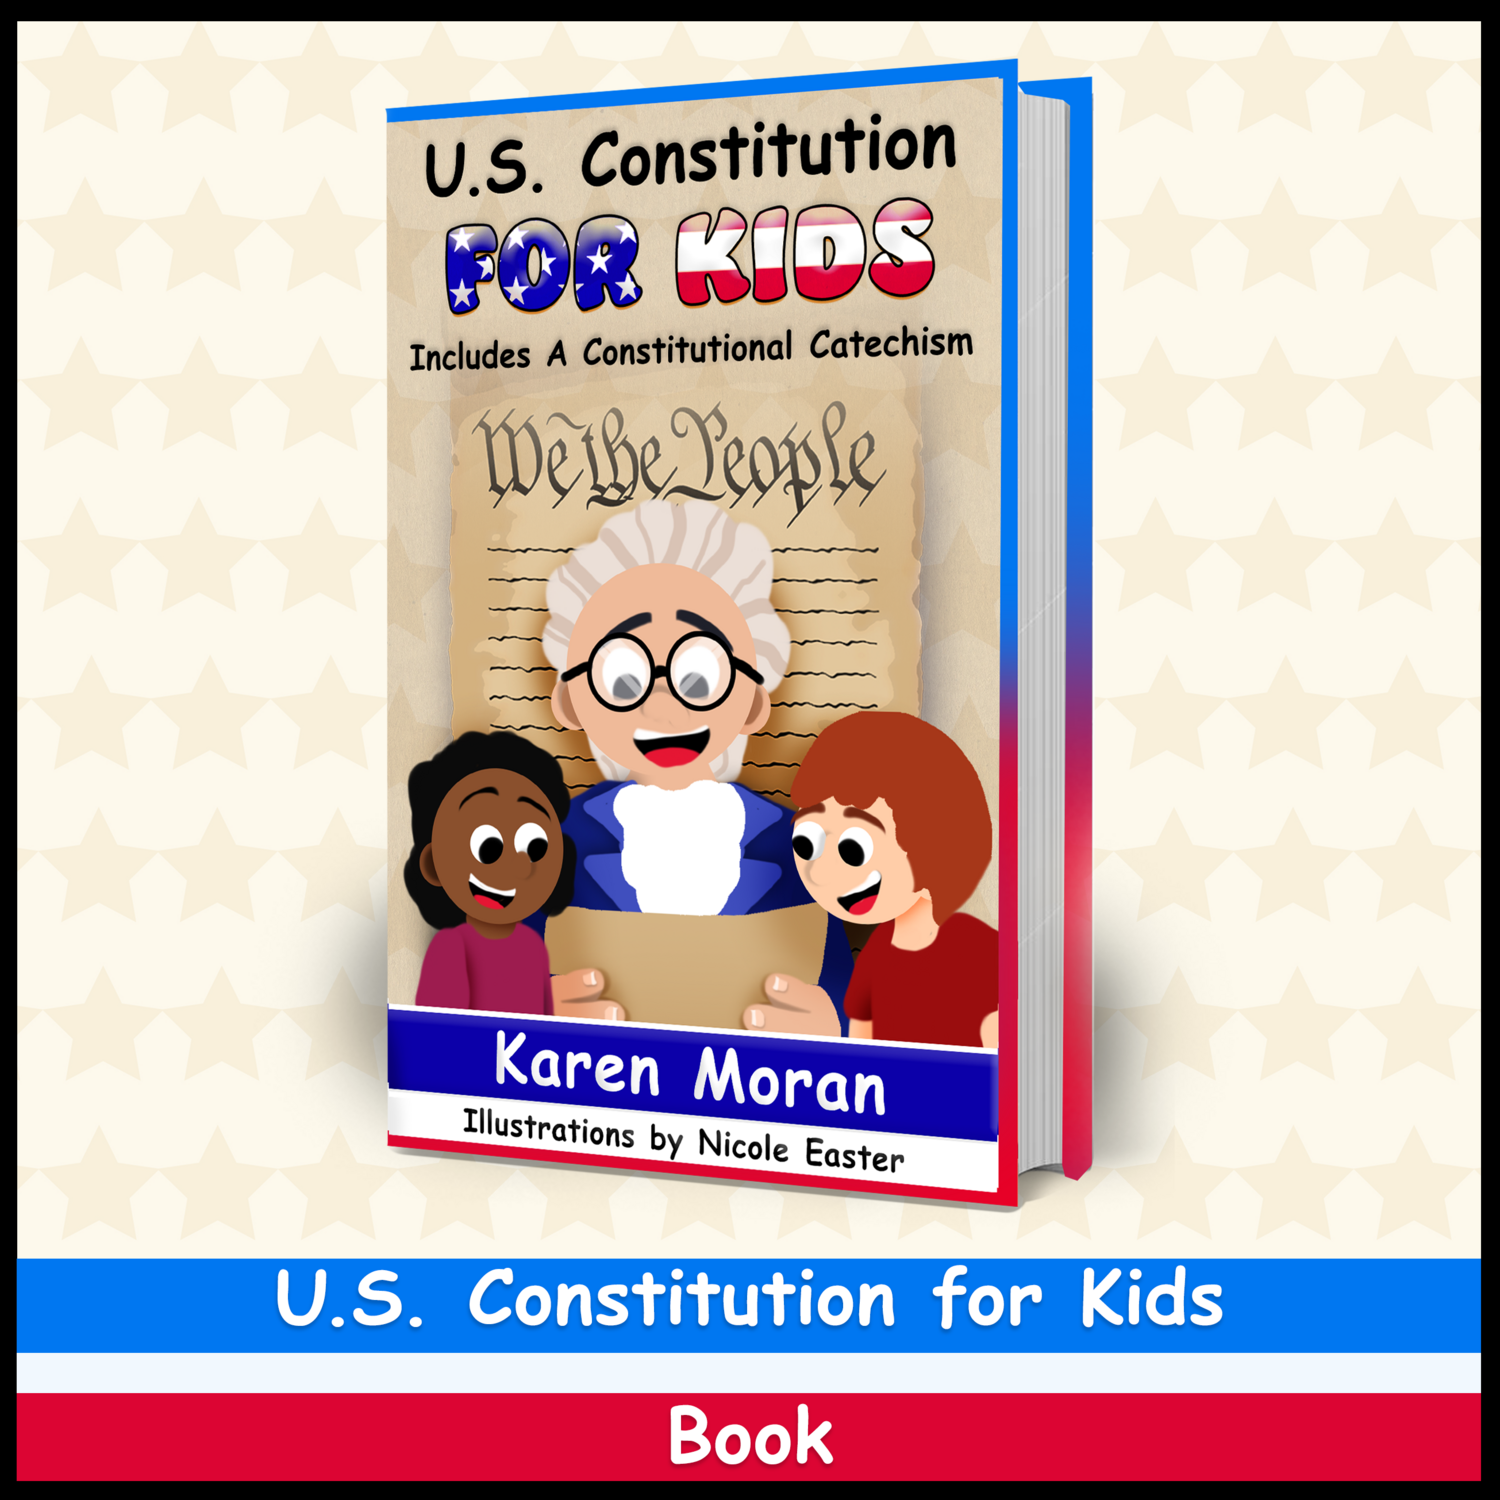 The U.S. Constitution for Kids Paperback Book